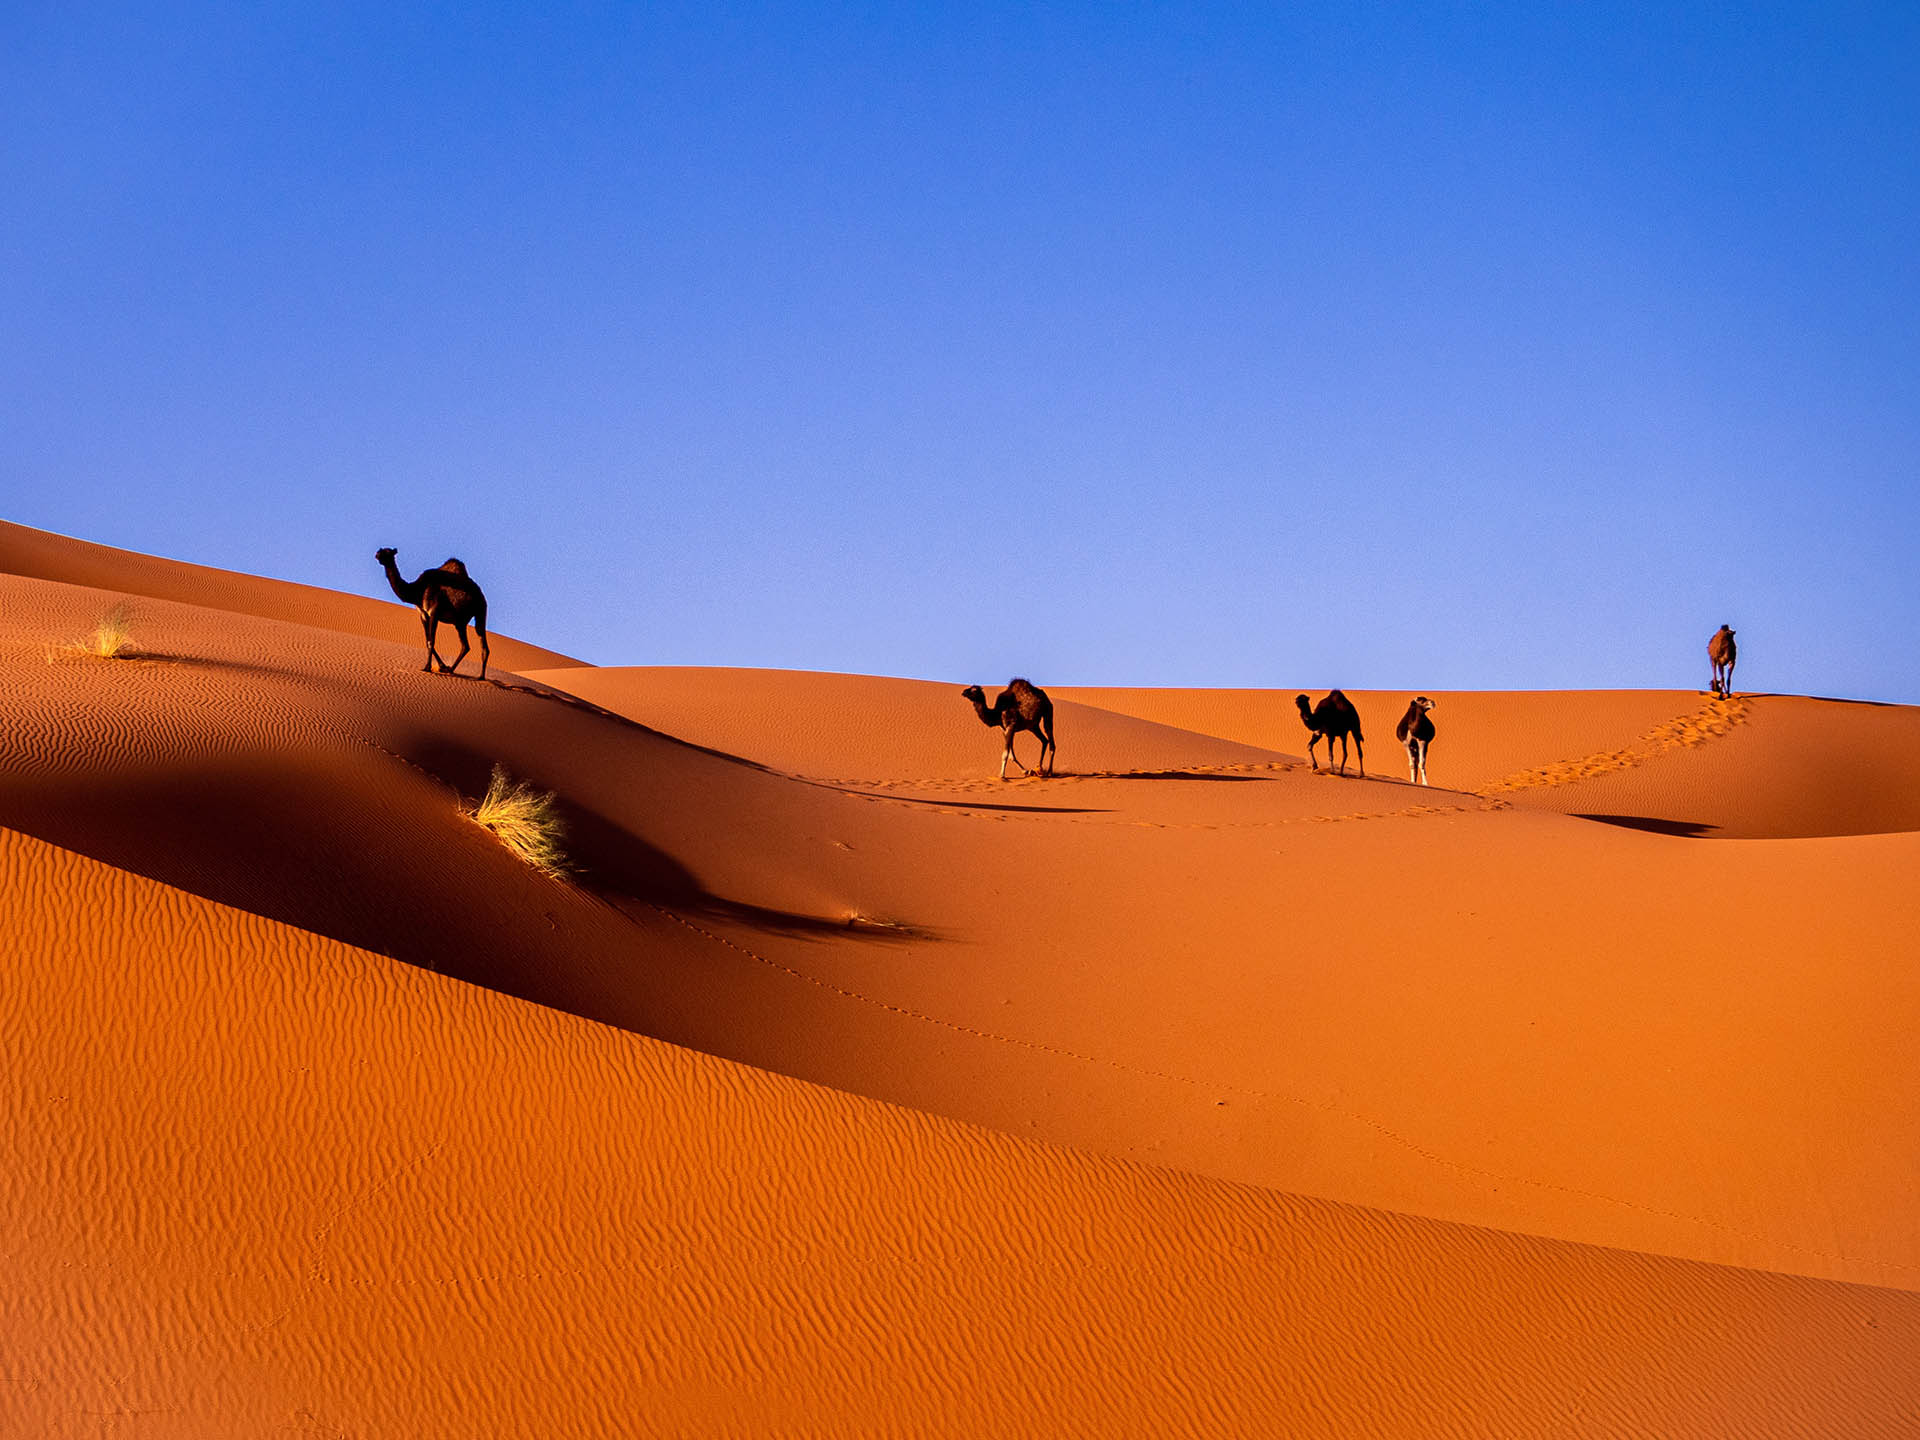 Short time in the red dunes of Merzouga from Marrakech